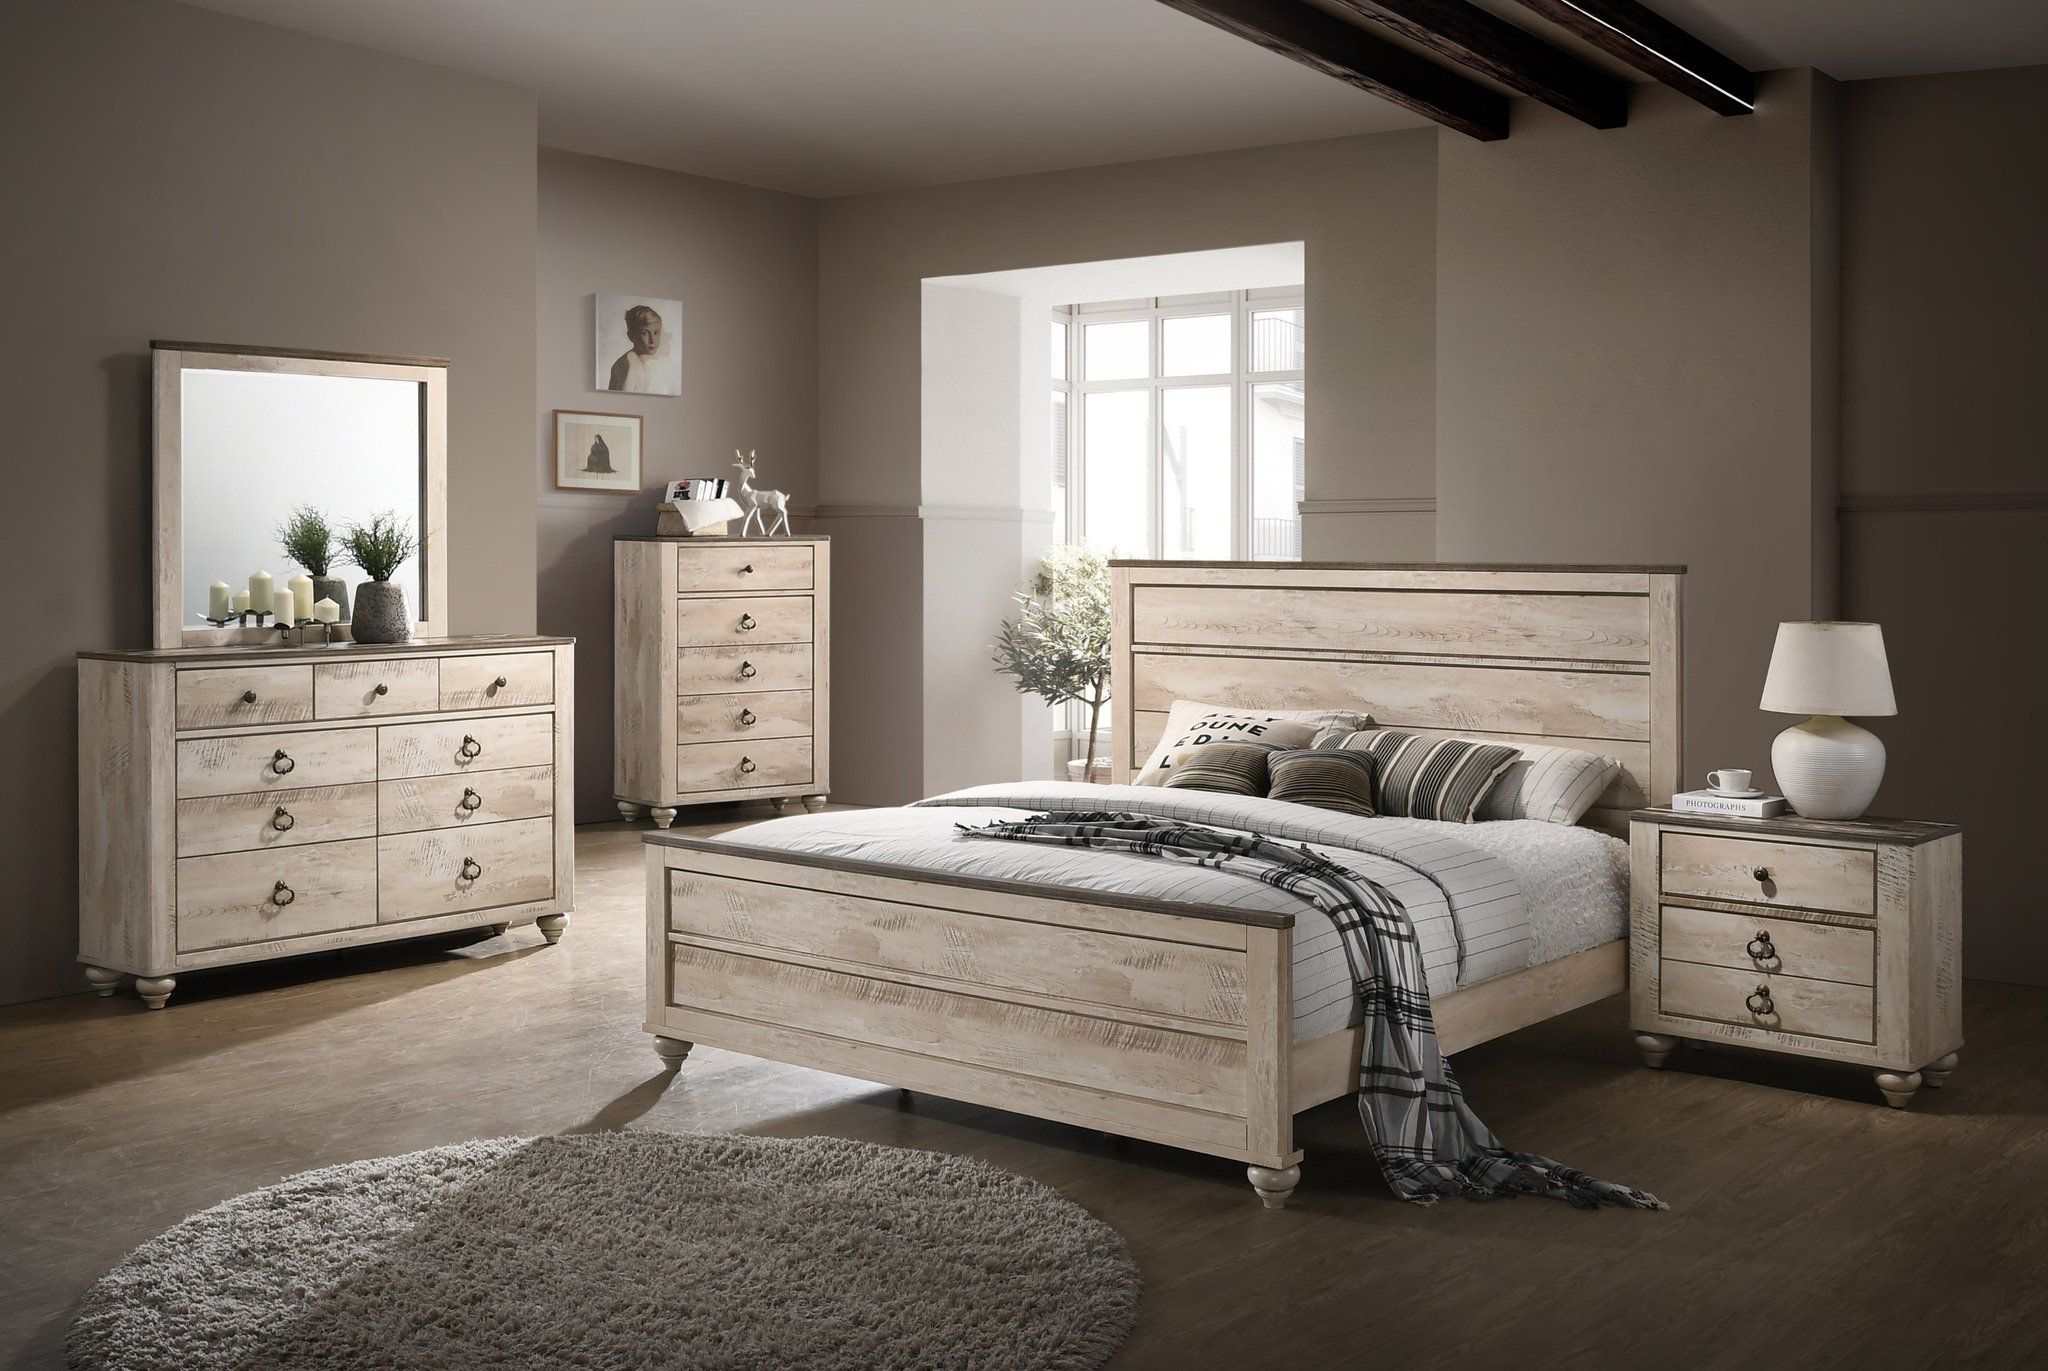 Roundhill Furniture Imerland Contemporary Bedroom Set. White Wash. Queen/King. 3-4-5-6 PCS Available